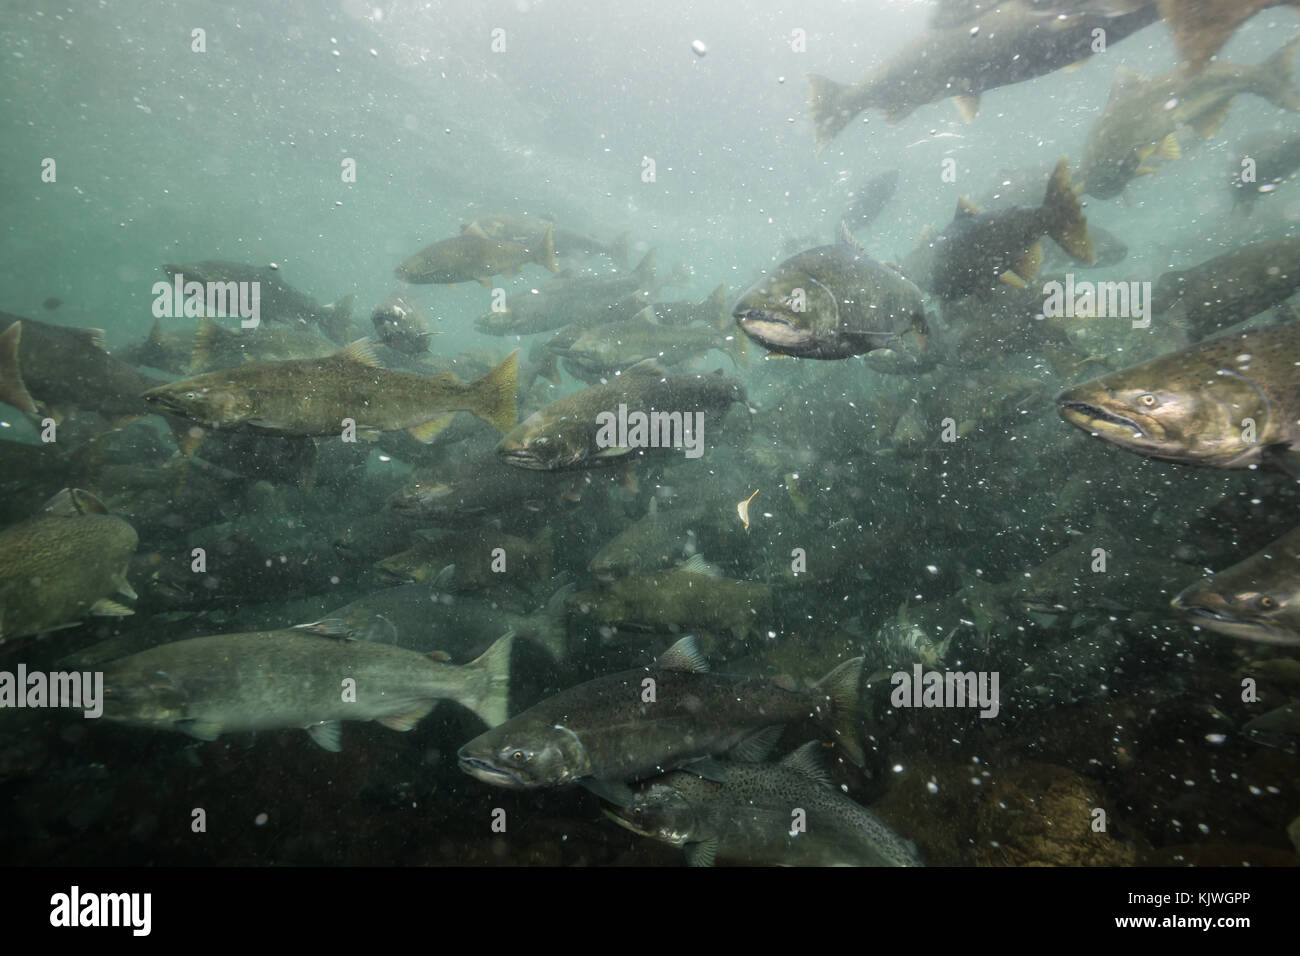 Underwater picture of many salmon swiming in the river during the spawning season. Taken near Chilliwack, East of Vancouver, British Columbia, Canada. Stock Photo